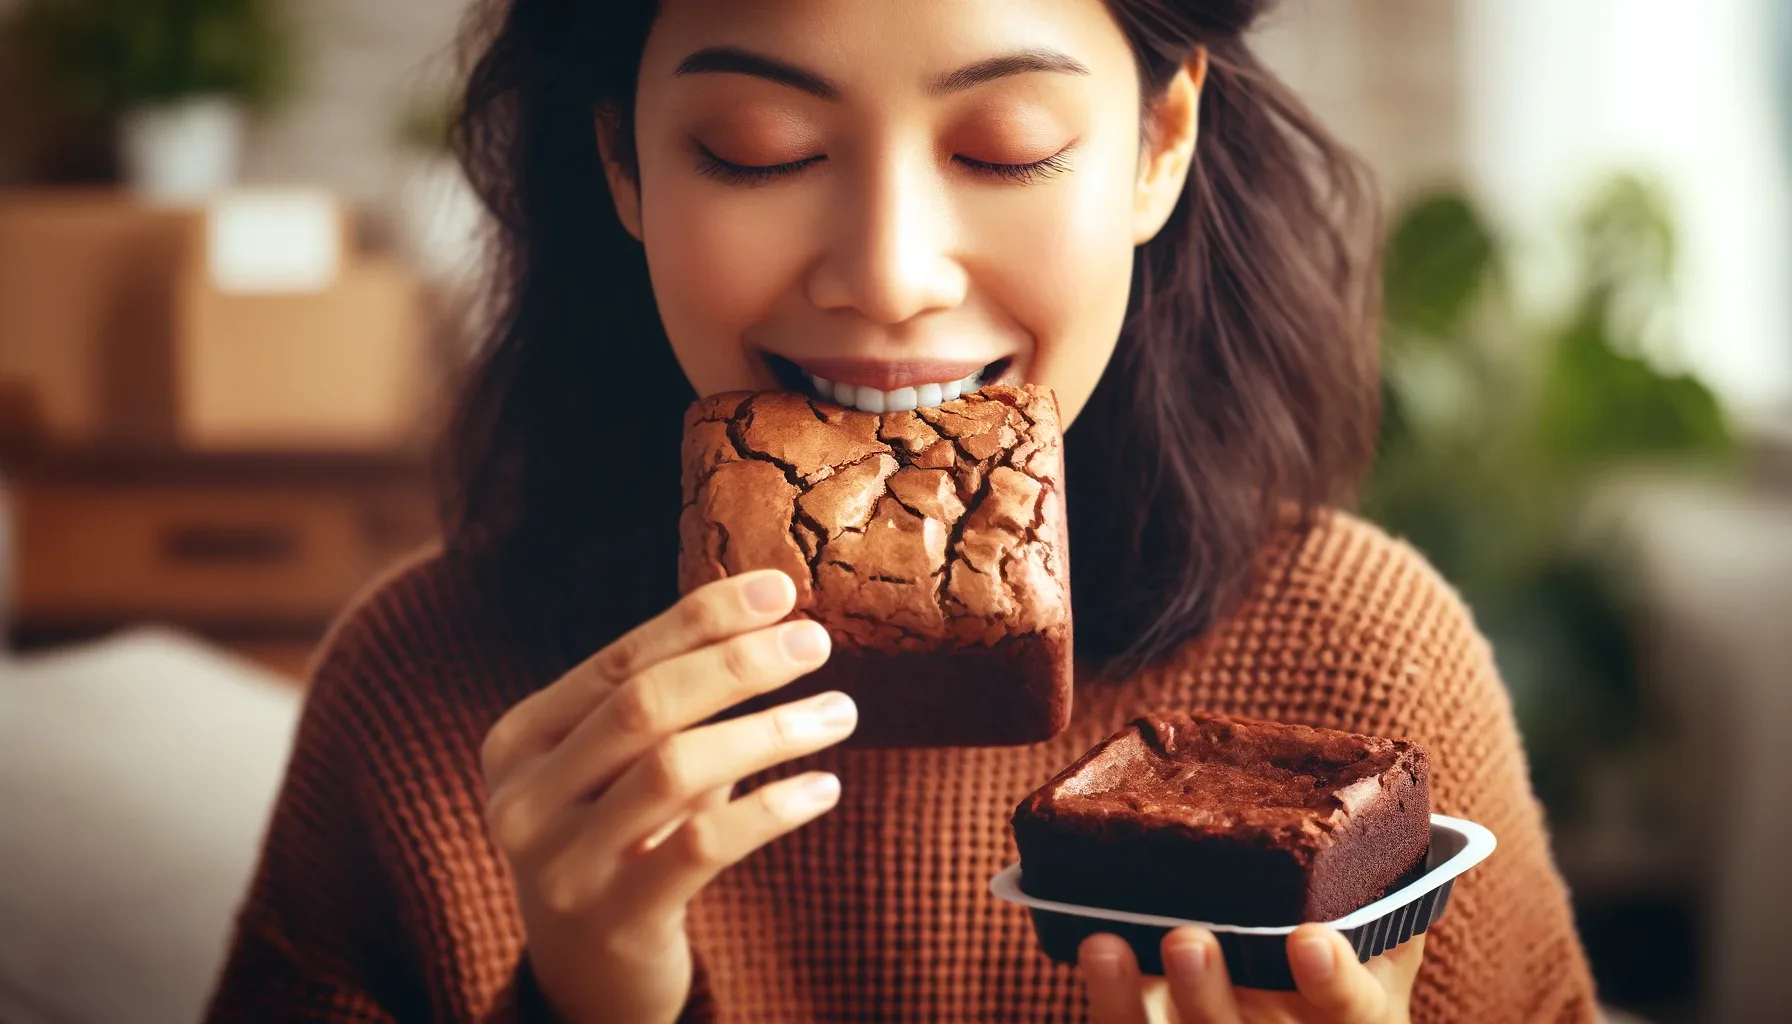 A young Asian woman savors a large brownie while holding a second brownie.